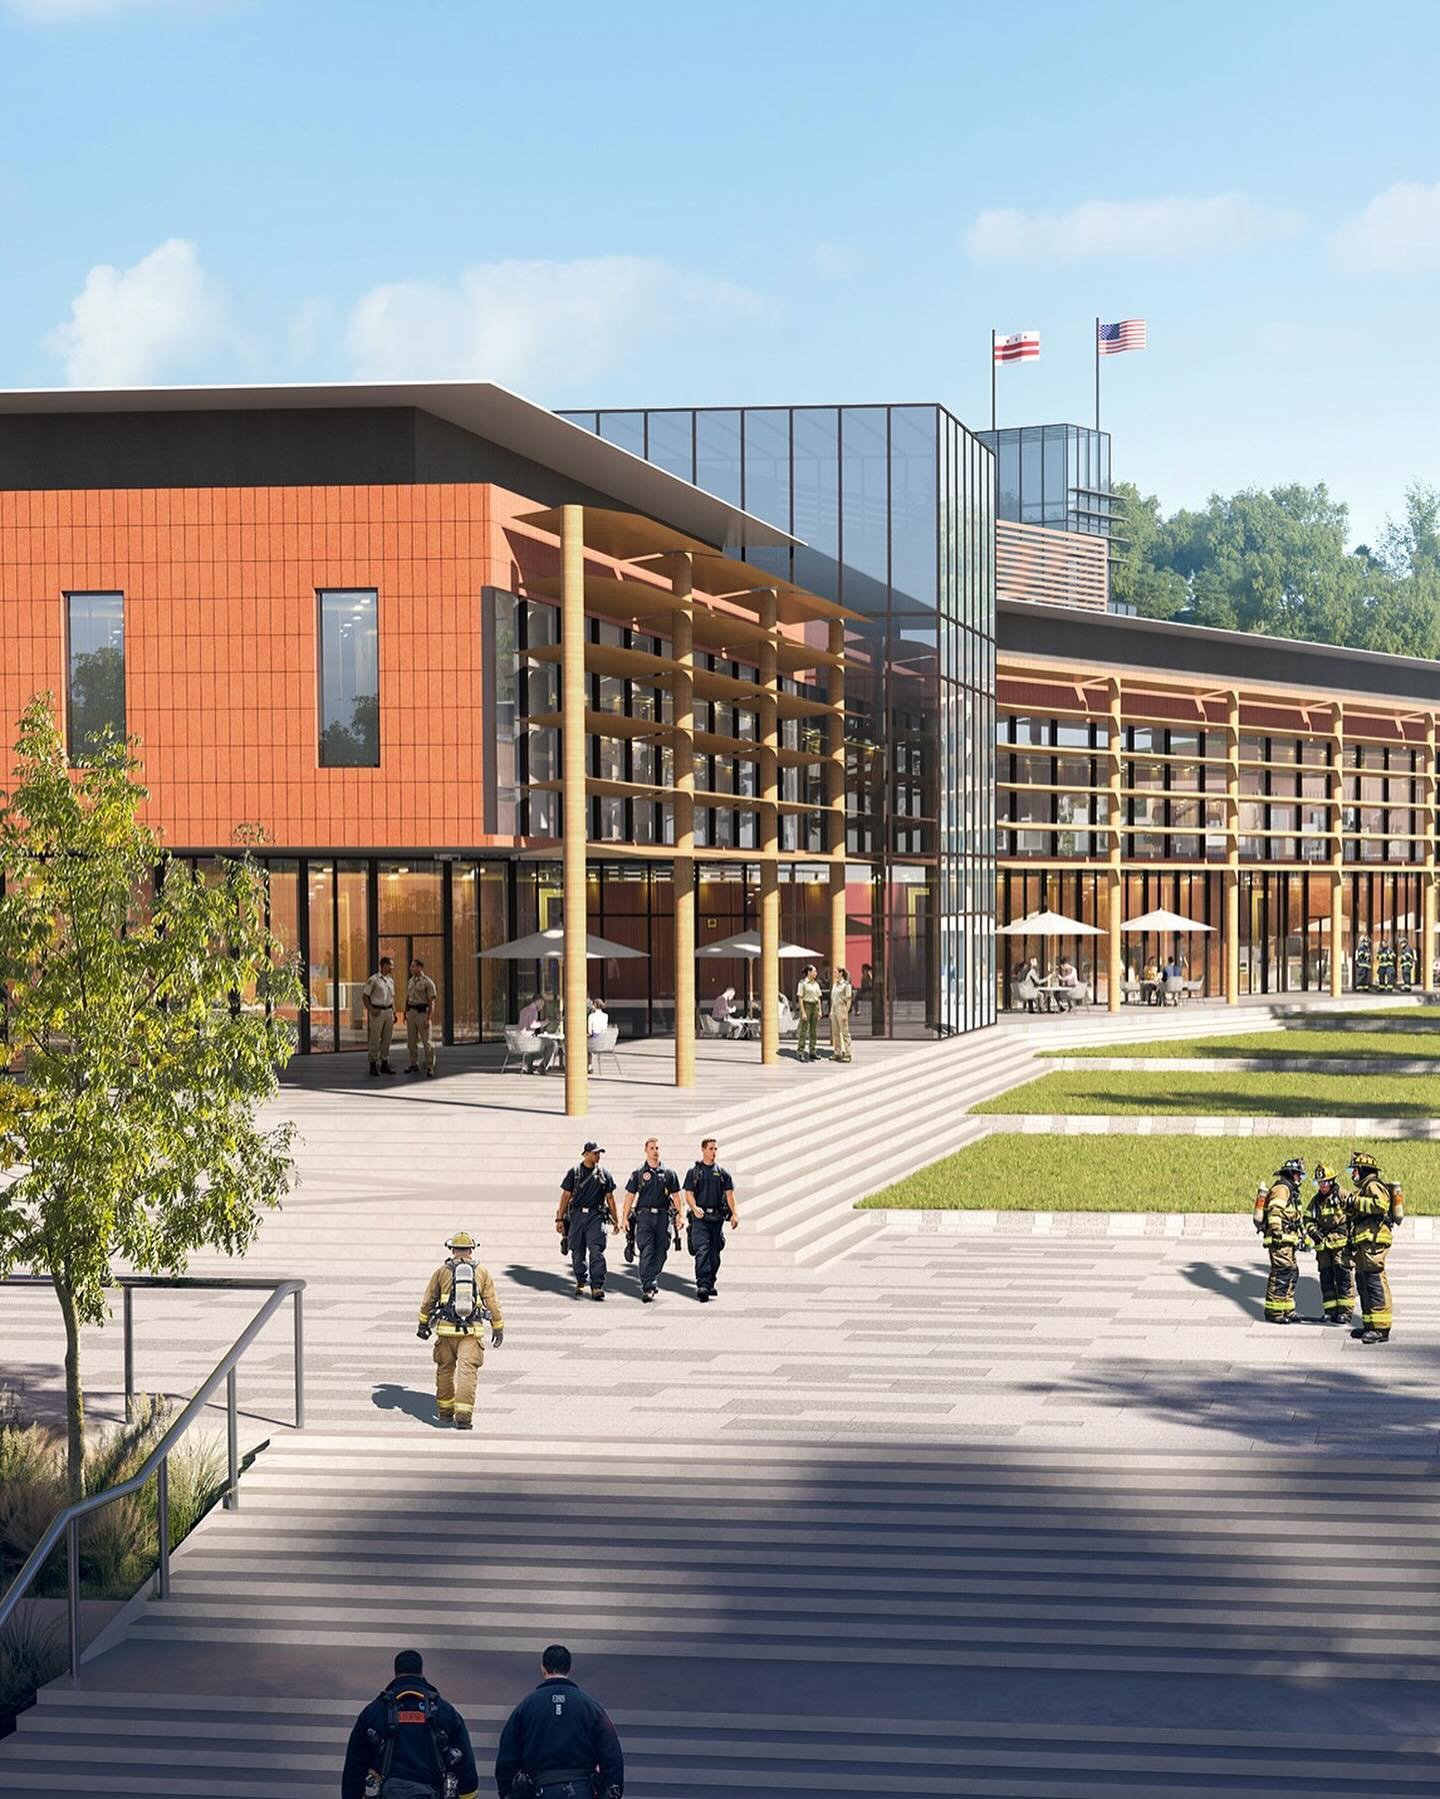 We&rsquo;ve designed the Public Safety Training Academy of the future to be resilient - managing stormwater onsite and harvesting rainwater. ISTUDIO x FGMA

Innovative stormwater management solutions are integrated into green spaces throughout the ca